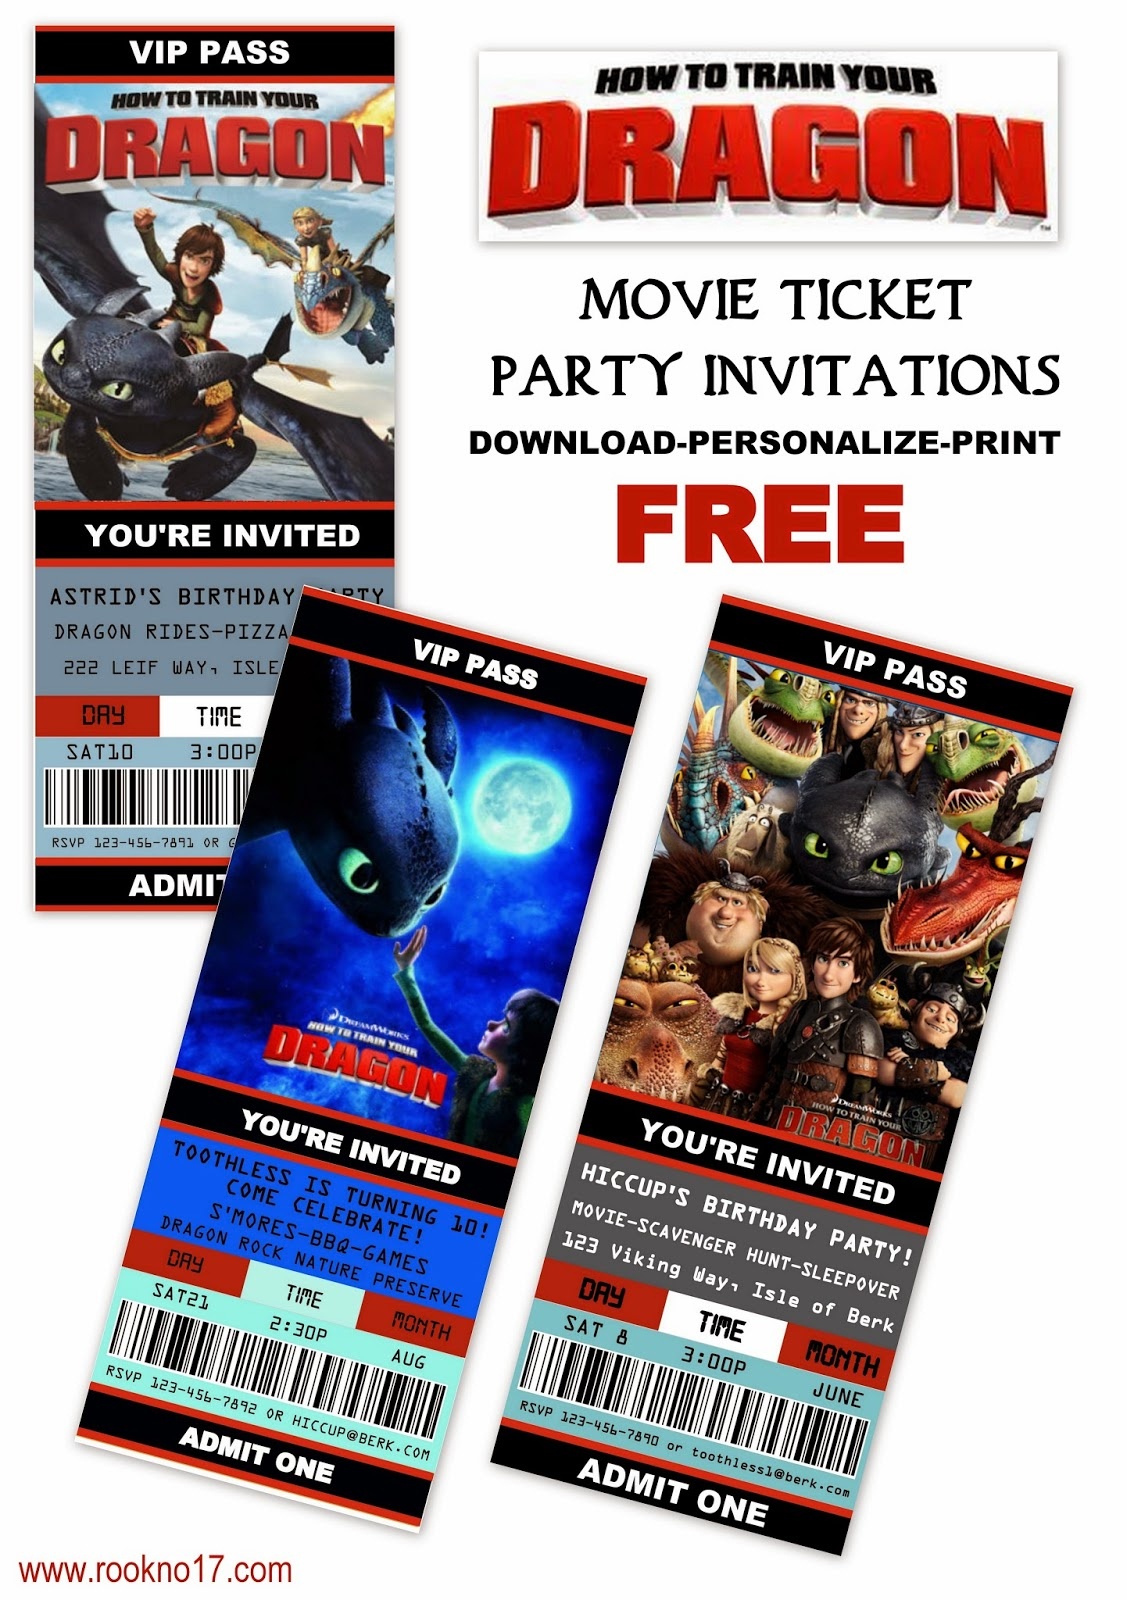 Train Party Invitation Template. Thomas The Train Ticket Party - How To Train Your Dragon Birthday Invitations Printable Free